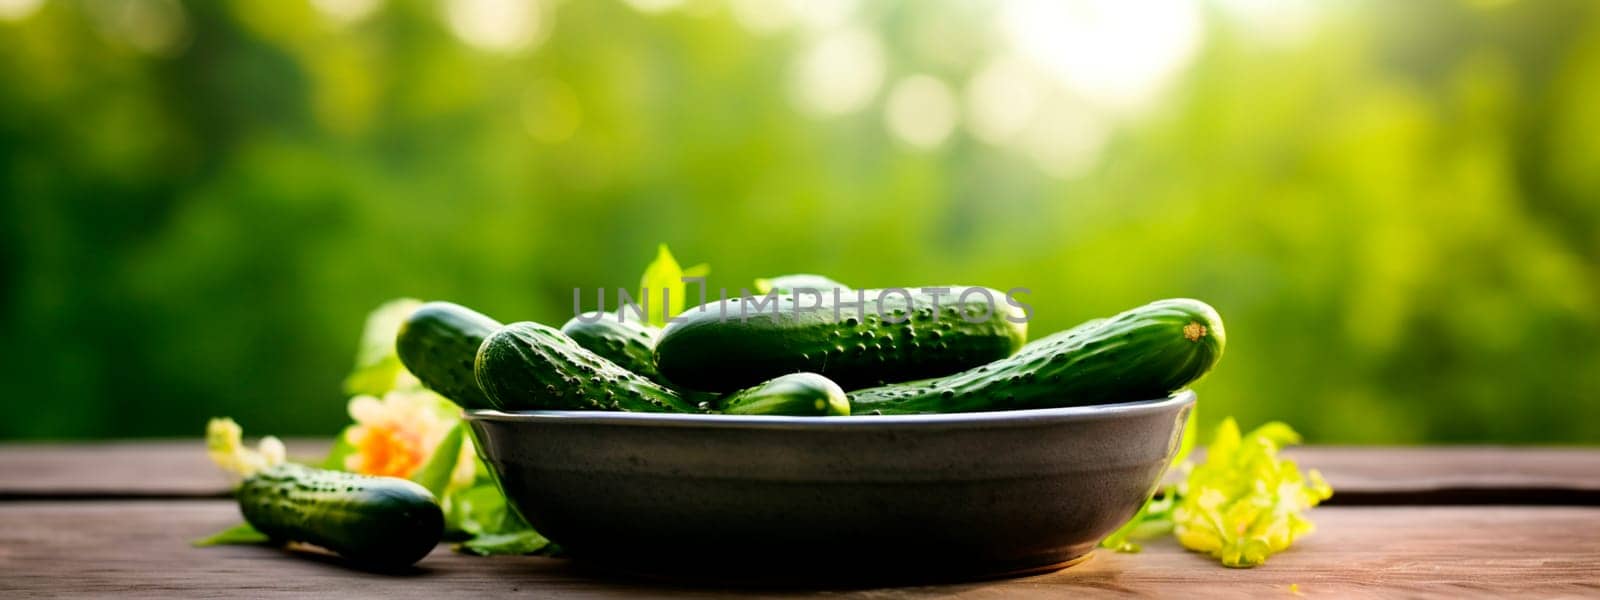 Cucumbers in a bowl against the backdrop of the garden. Selective focus. by yanadjana